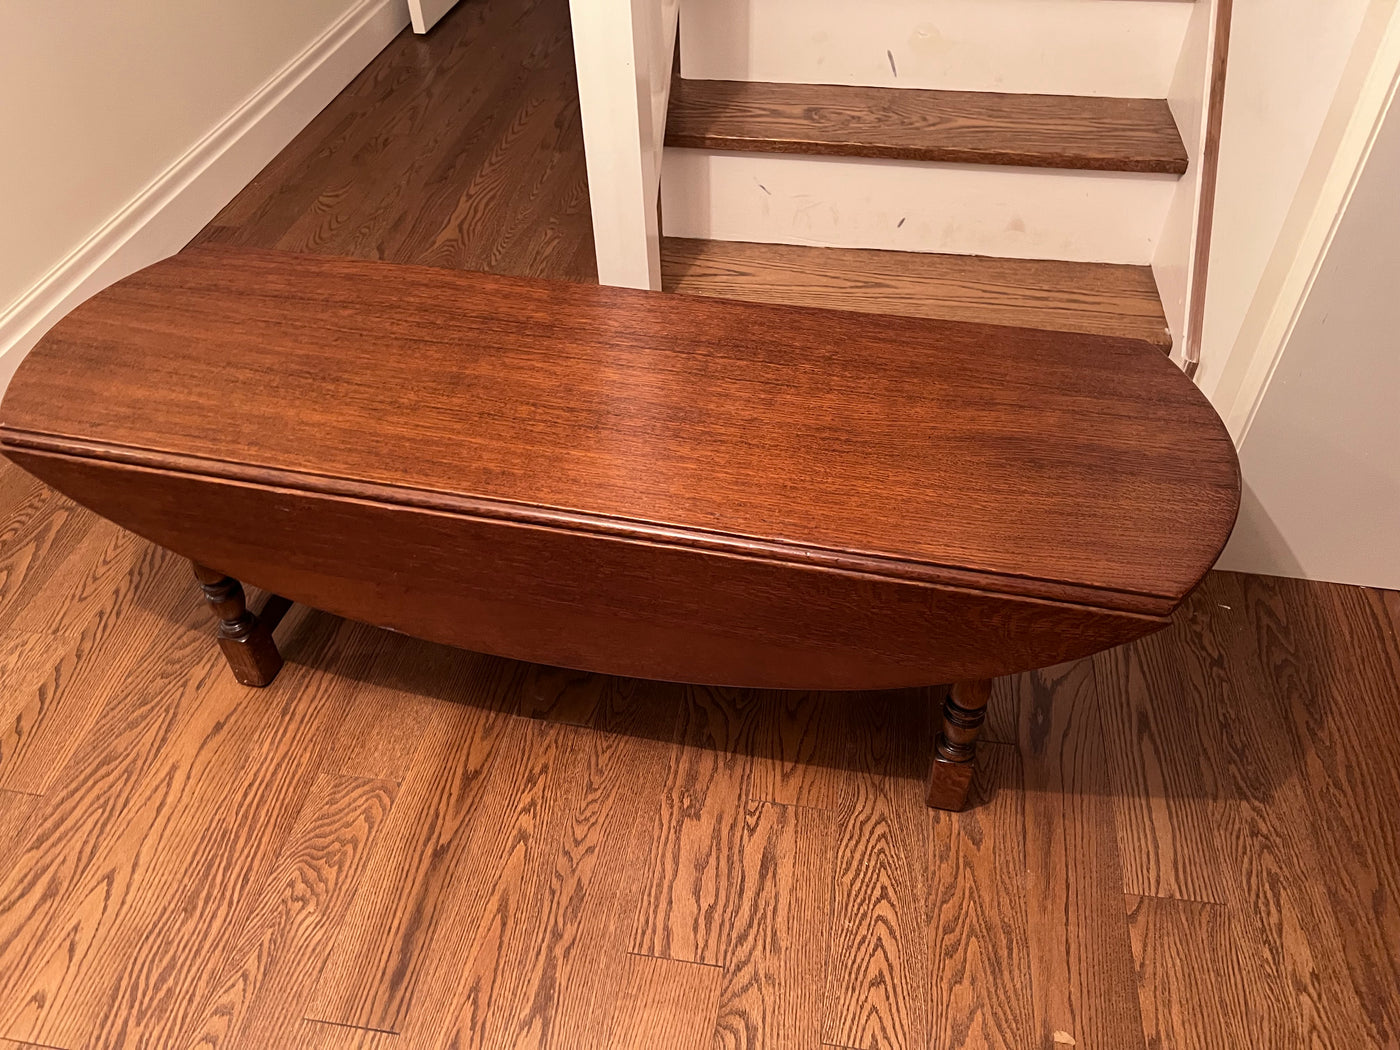 Solid Oak Wood Oval Drop Leaf Coffee Table – Sell My Stuff Canada -  Canada's Content and Estate Sale Specialists